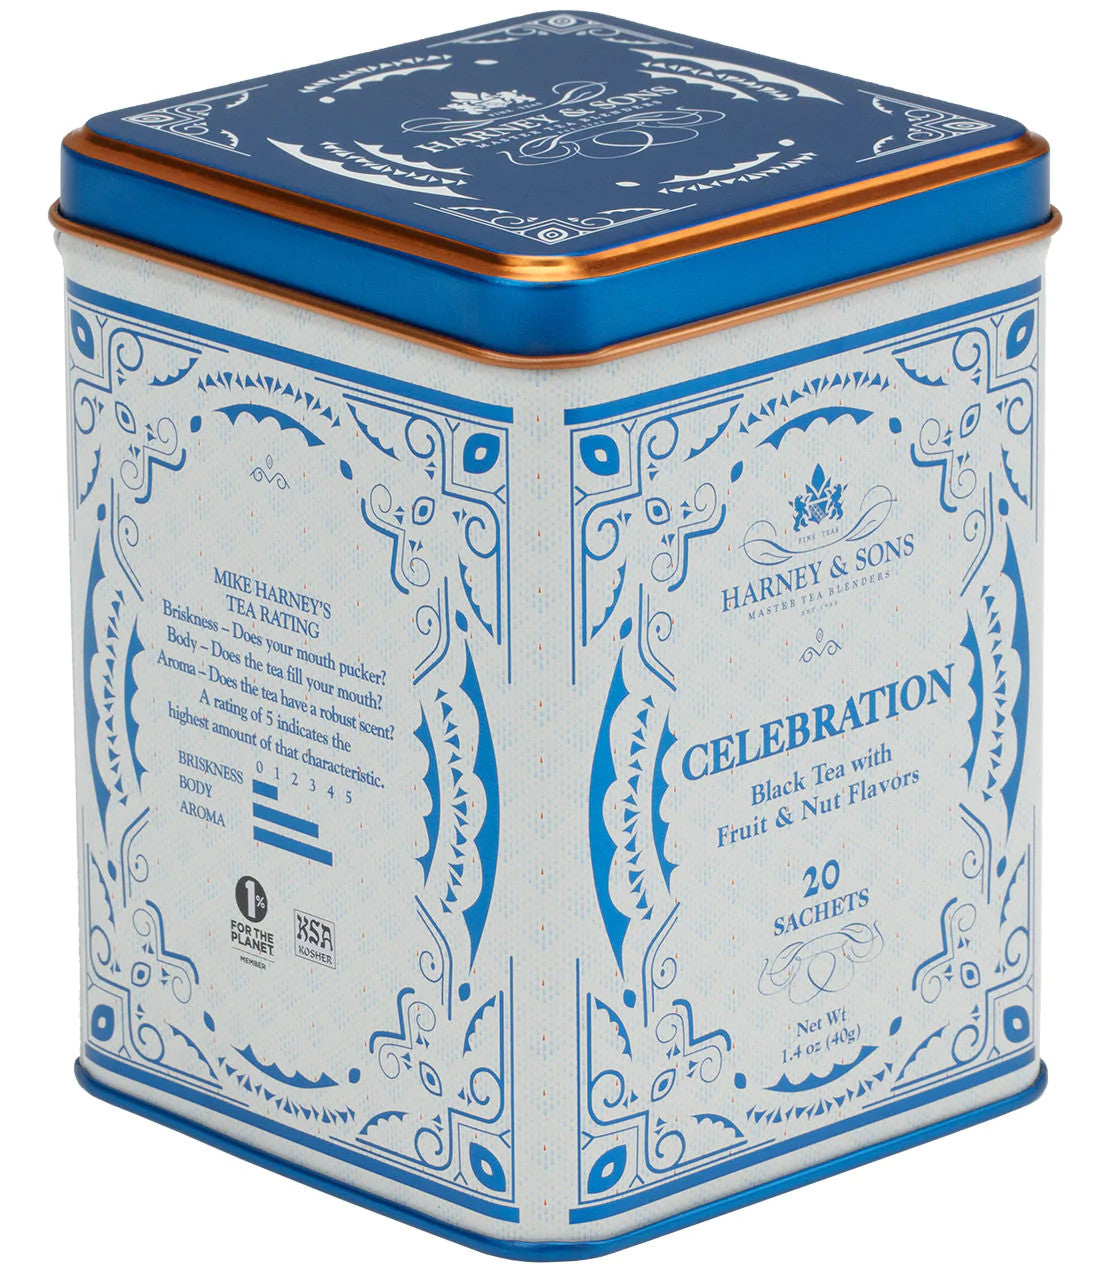 Holiday Celebration Tea by Harney & Sons. 20 teabags